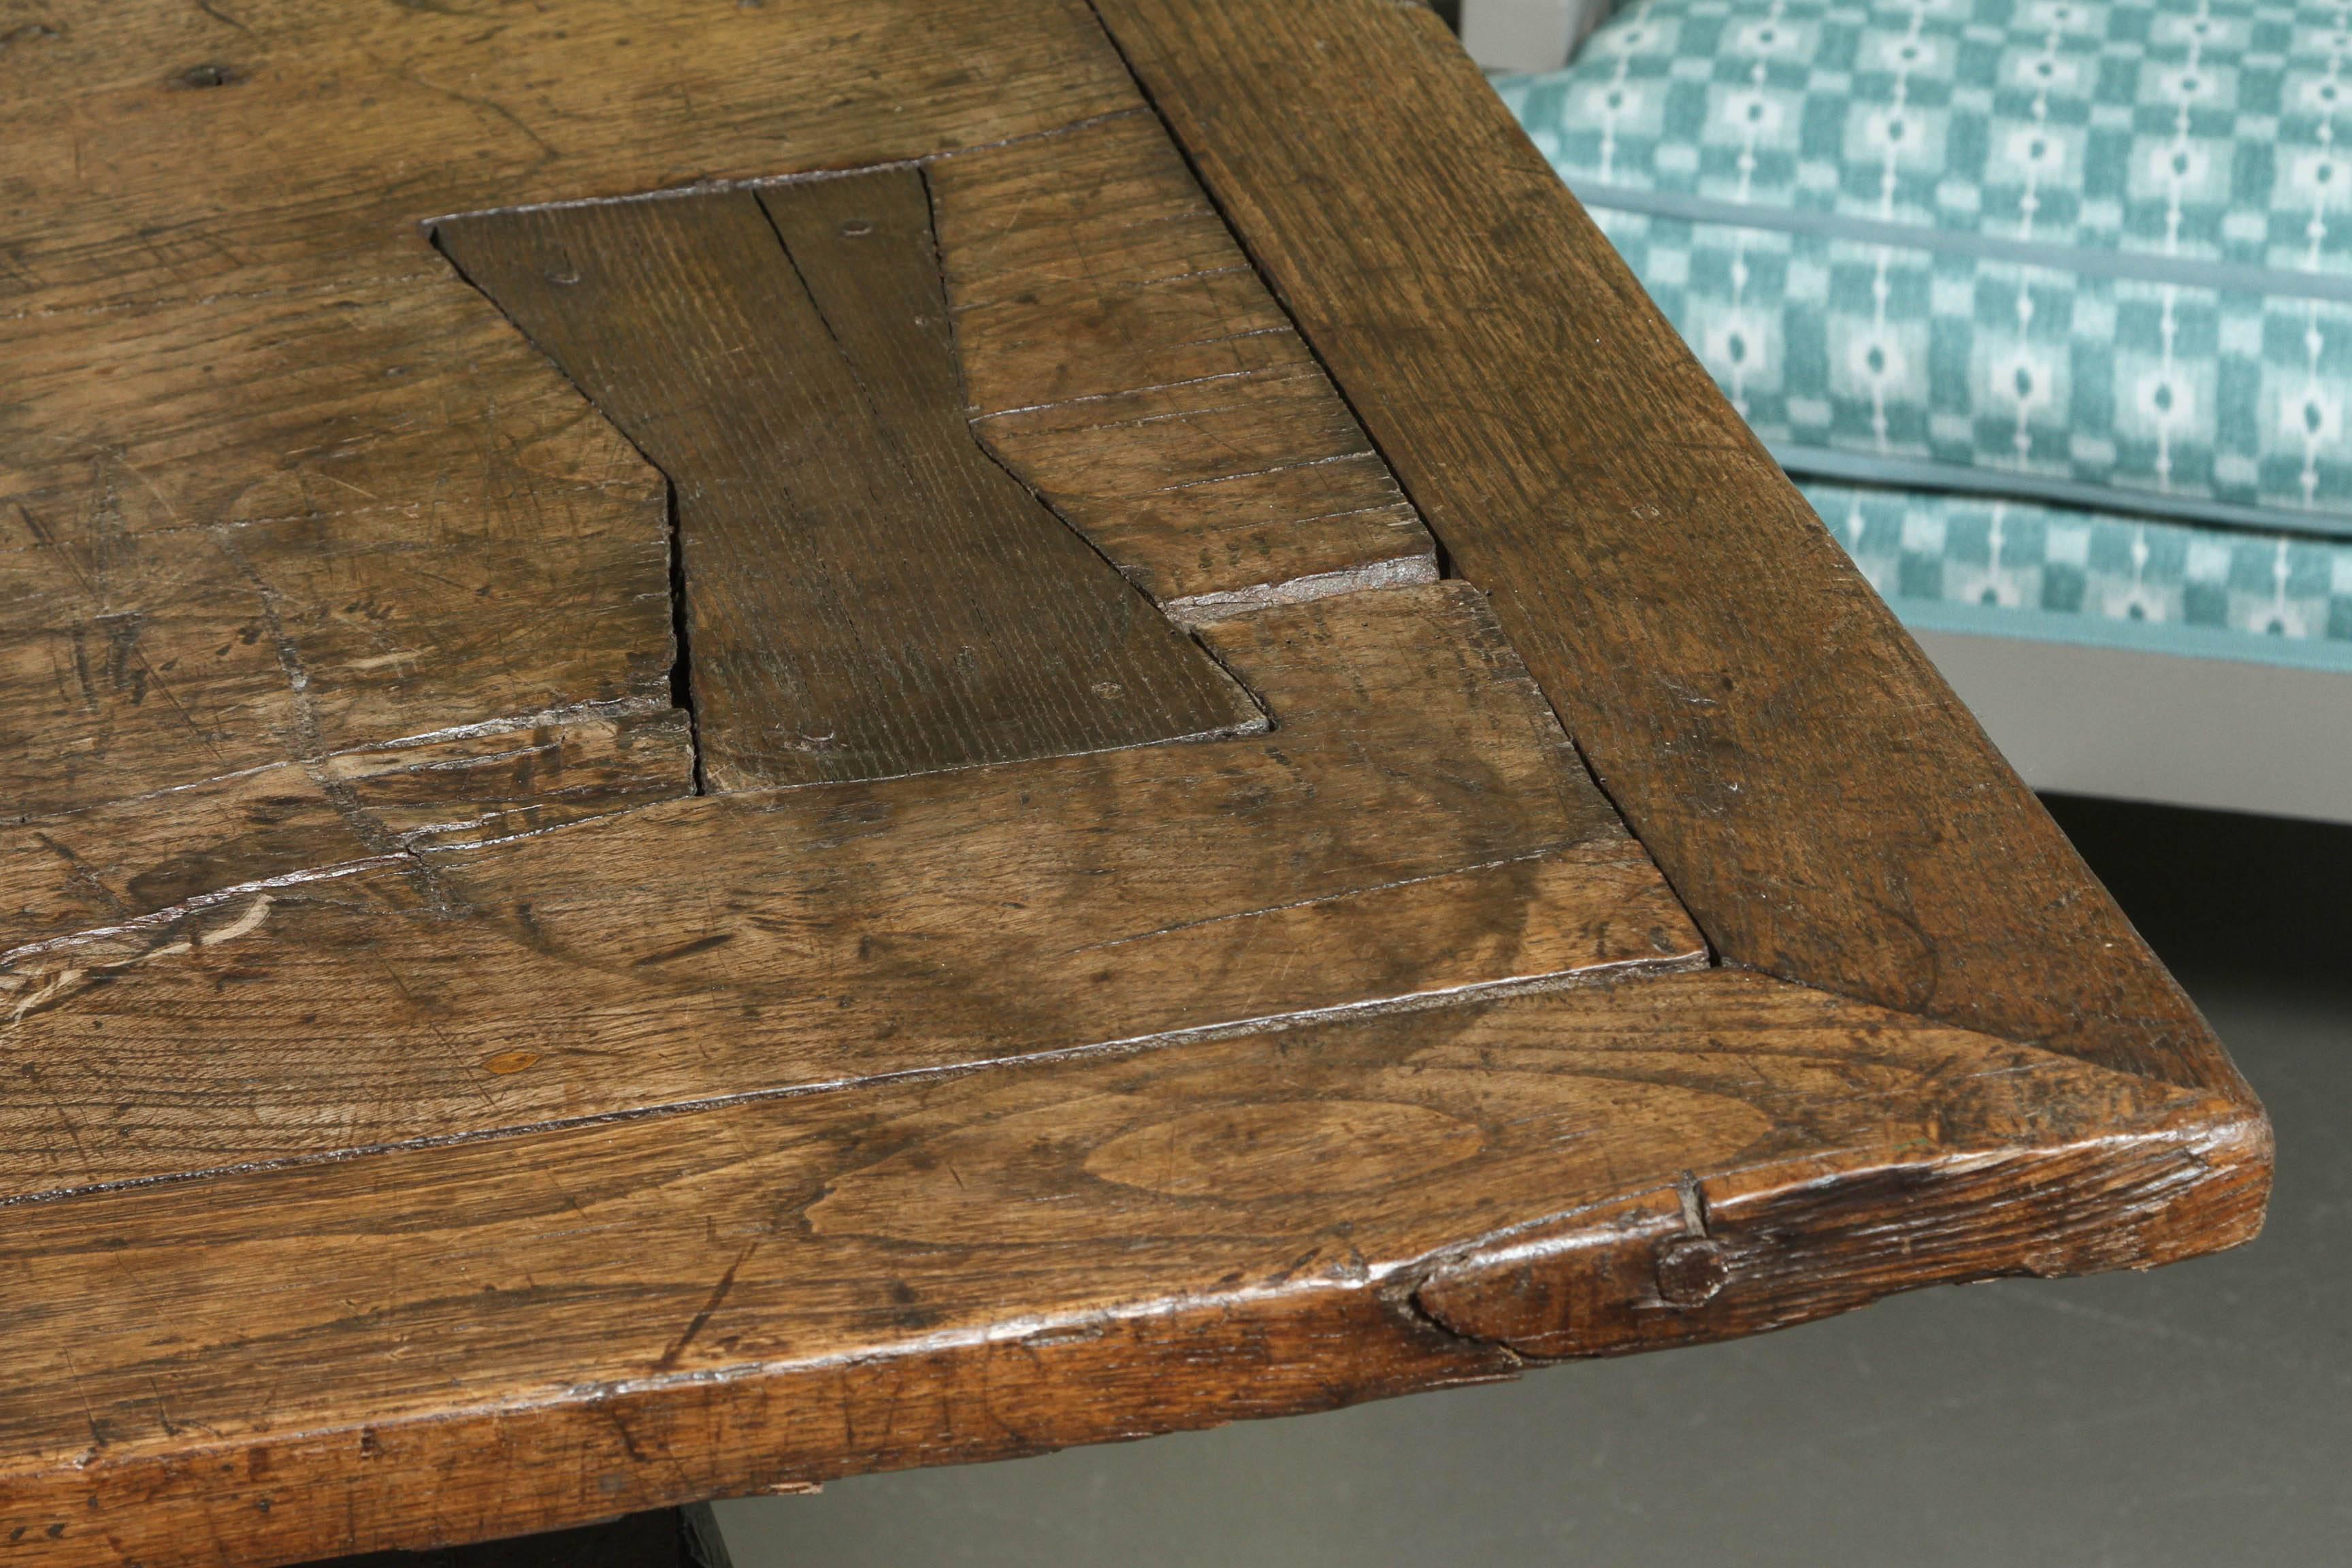 A large Portuguese oak table, circa 1700. A wonderful dining or center table. The oak has a beautiful patina.